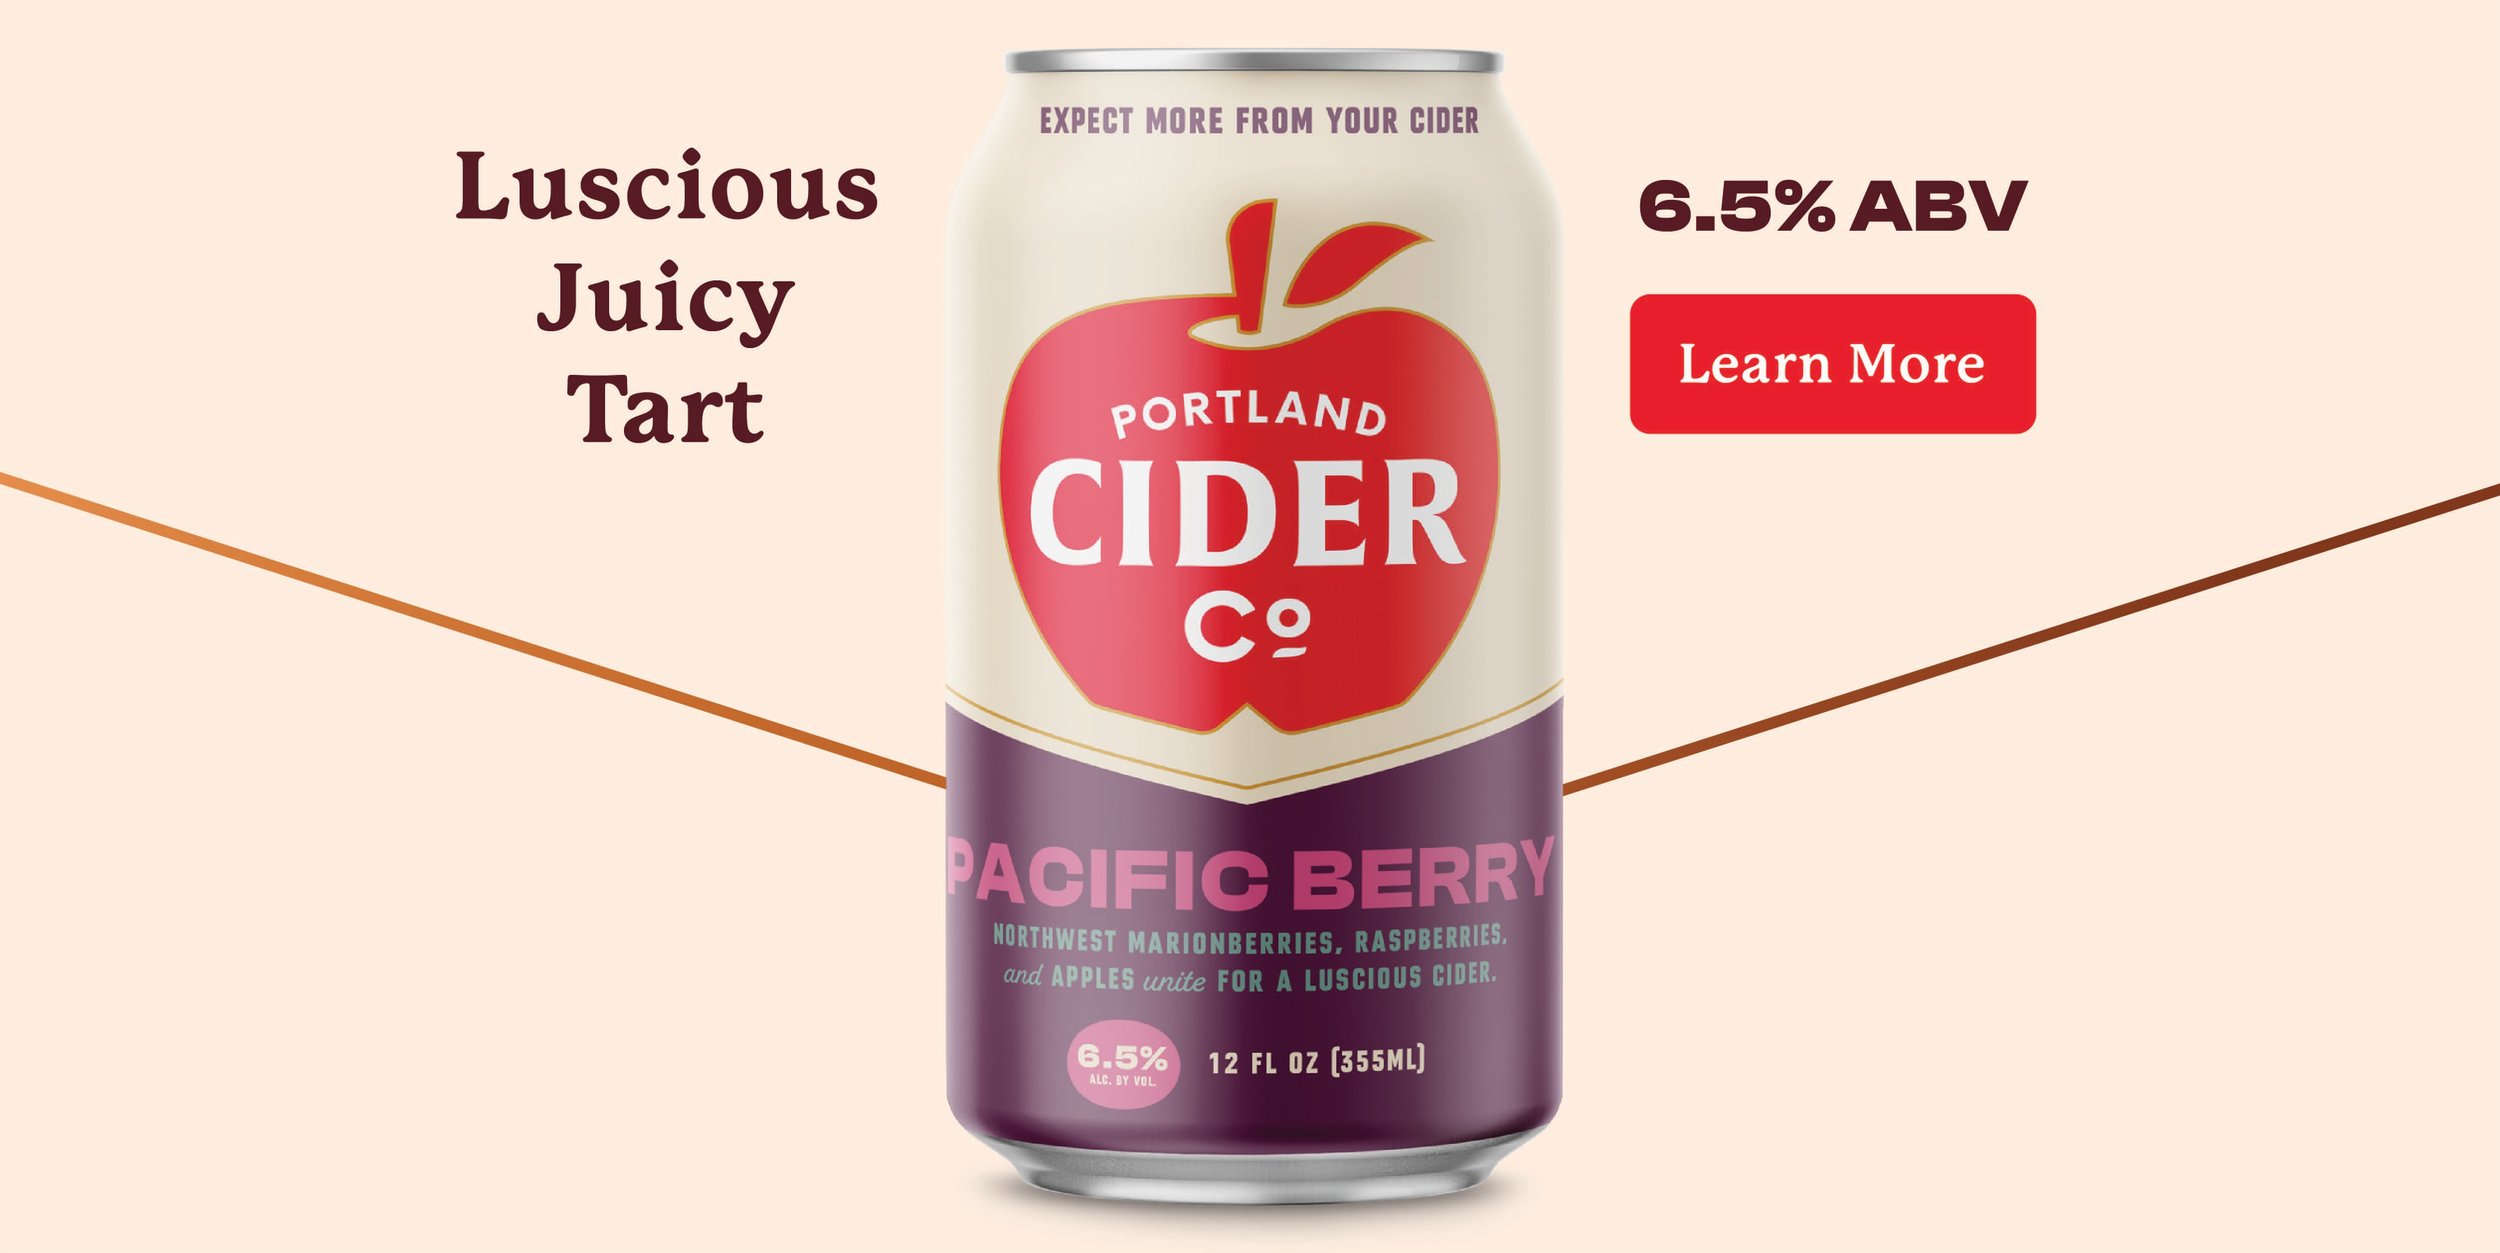 Home-Page-Our-Ciders-Gallery-PacificBerry.jpg